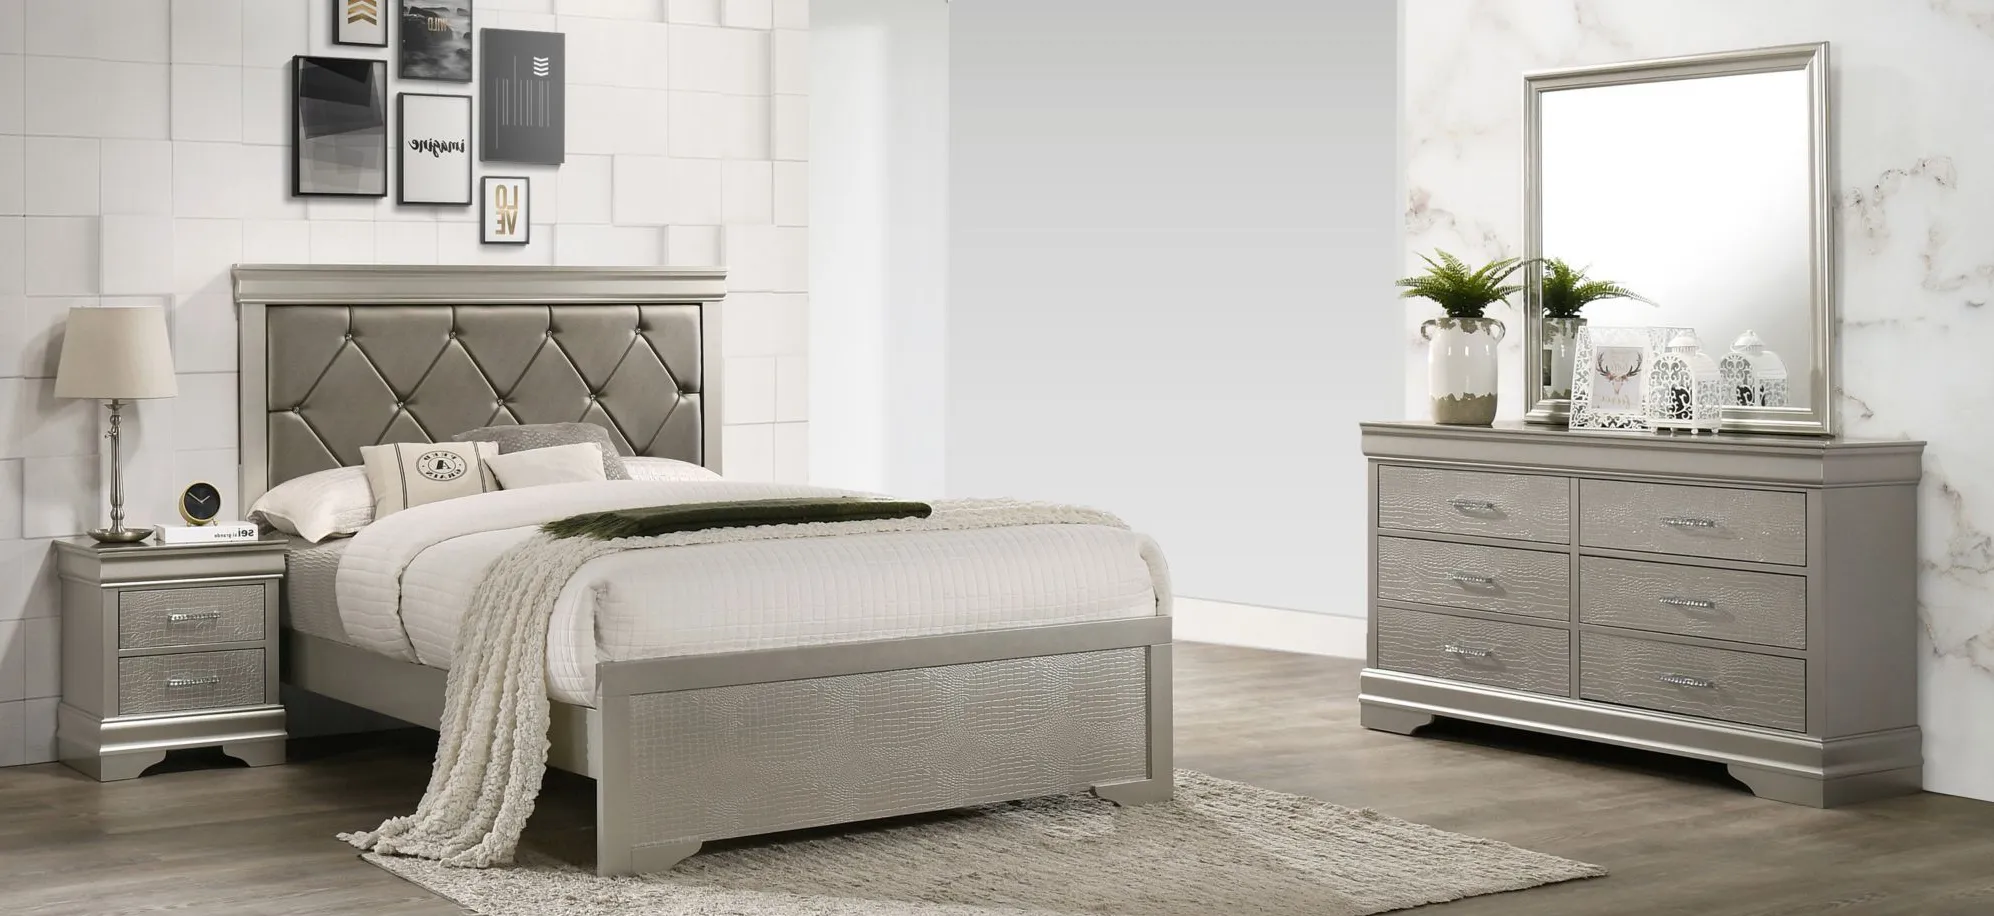 Amalia 4-pc. Bedroom Set in Champagne Silver by Crown Mark